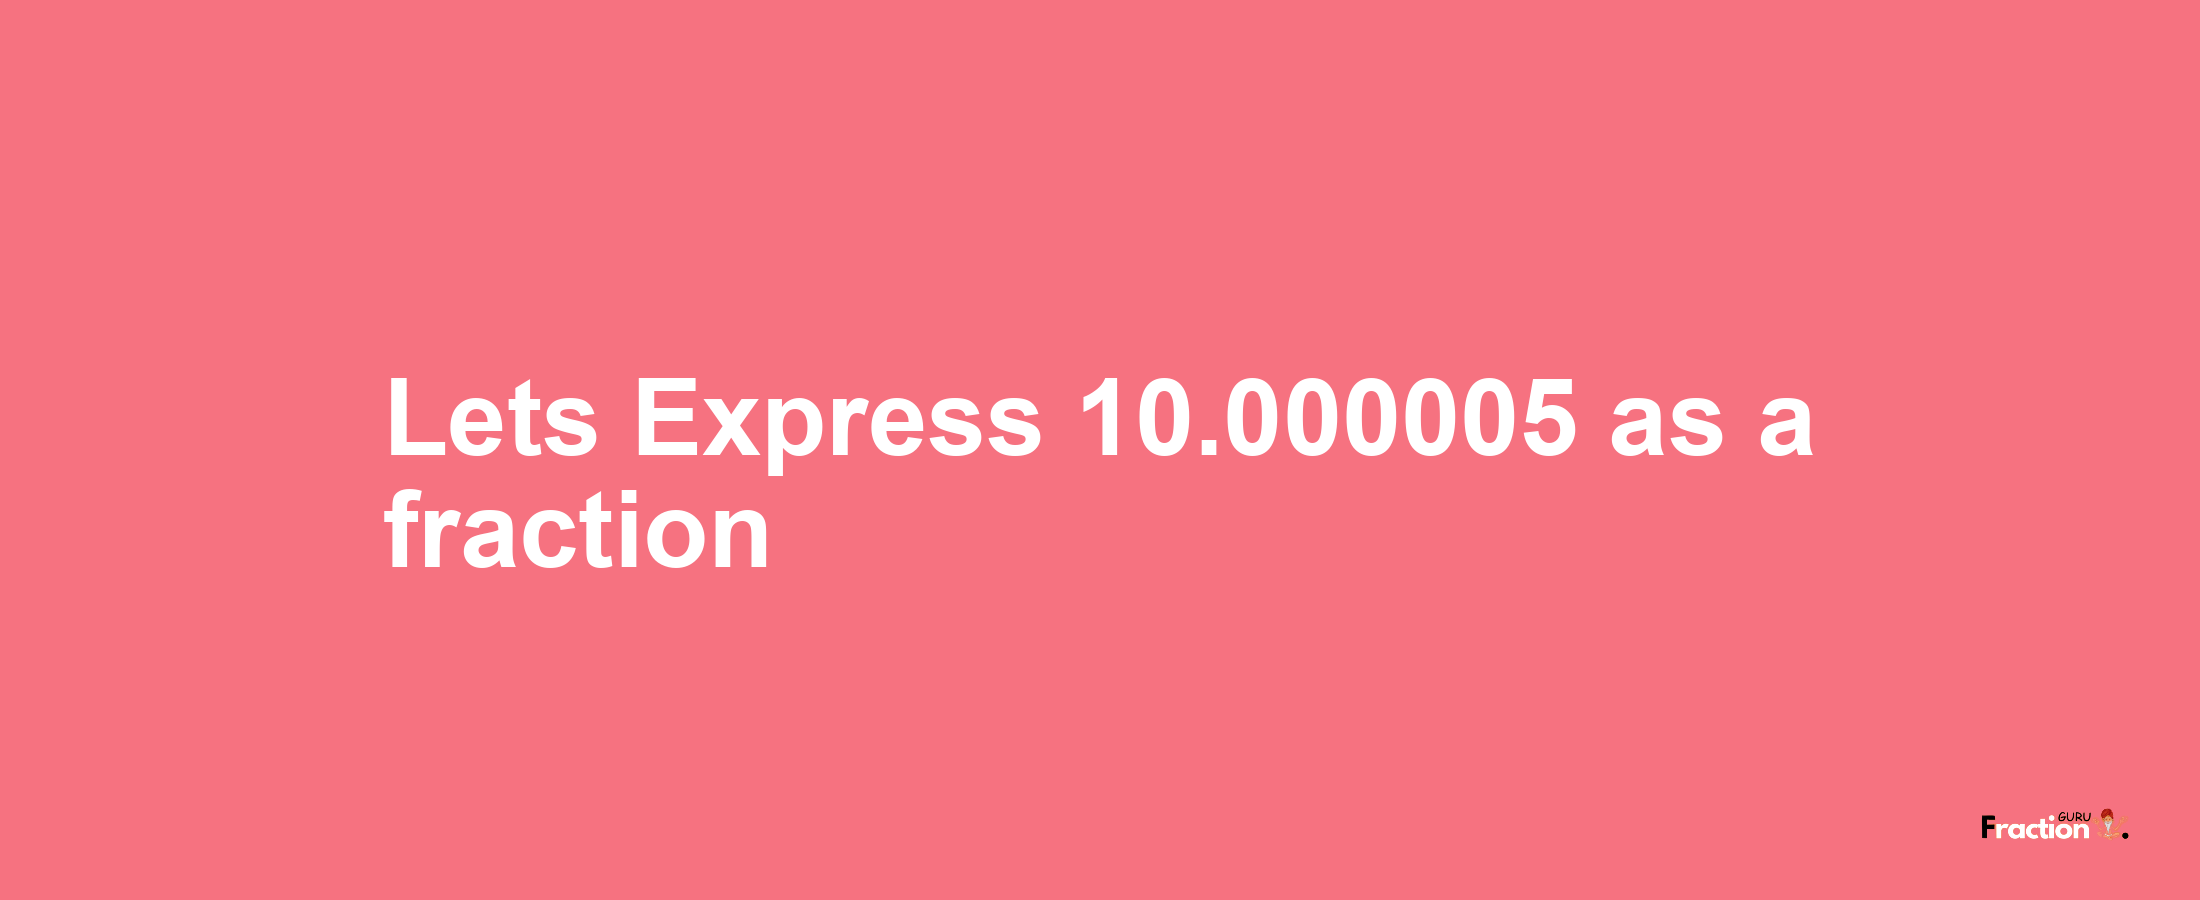 Lets Express 10.000005 as afraction